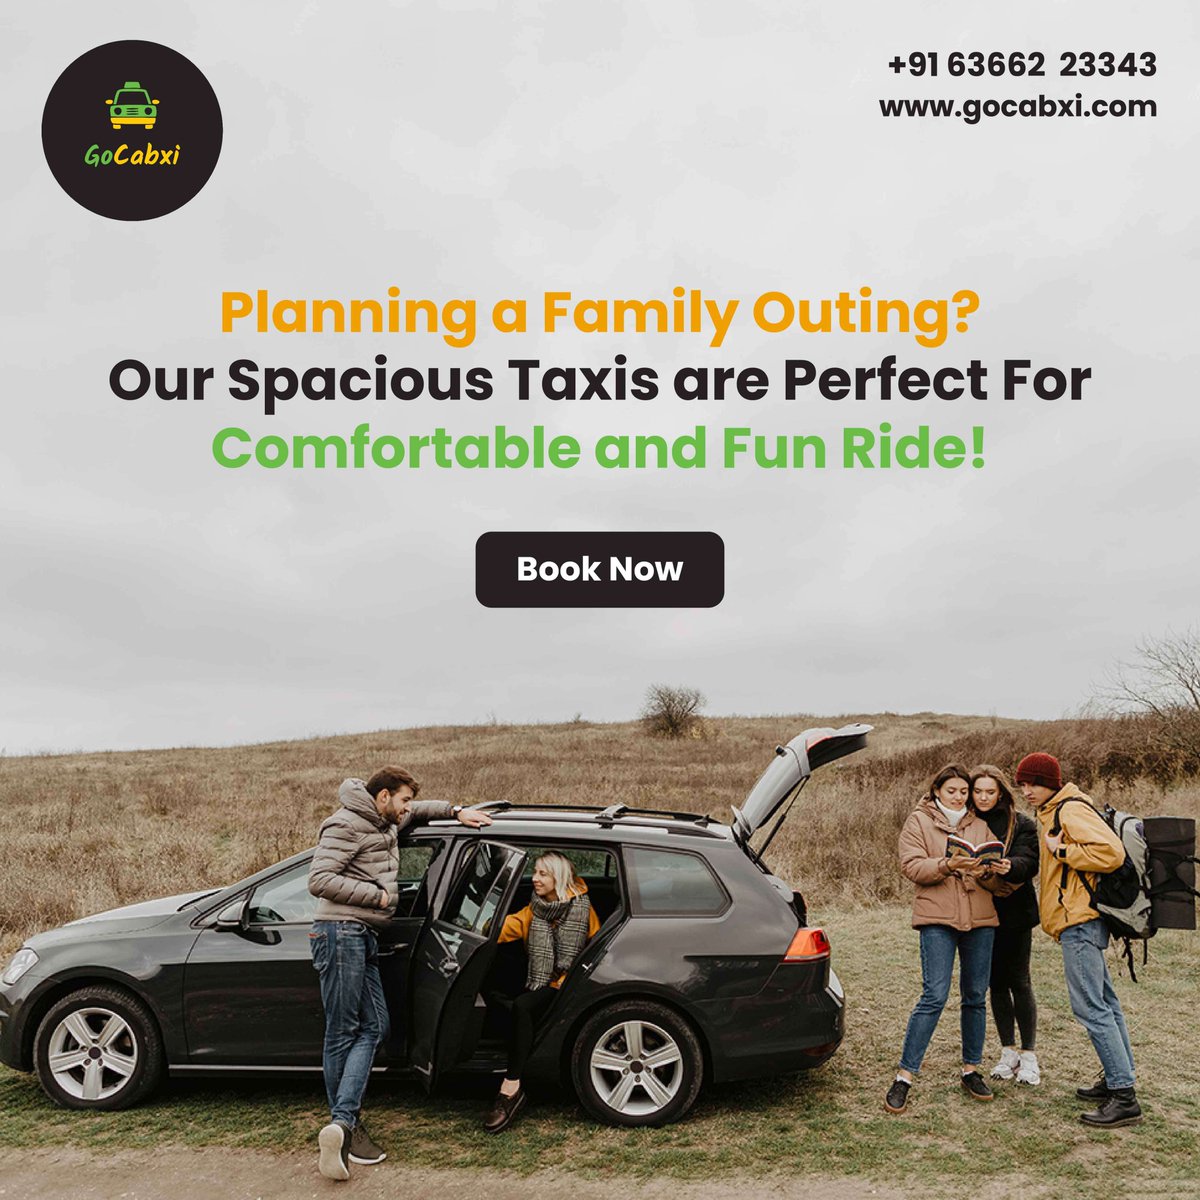 Big family, big plans? We've got the ride for you! Our spacious taxis ensure a comfortable and fun trip for everyone. Book our Gocabxi today! Read more : gocabxi.com Call: +916366223343 #taxilife #transportation #BusinessTravel #TaxiService #reliabletaxi #taxi #cab